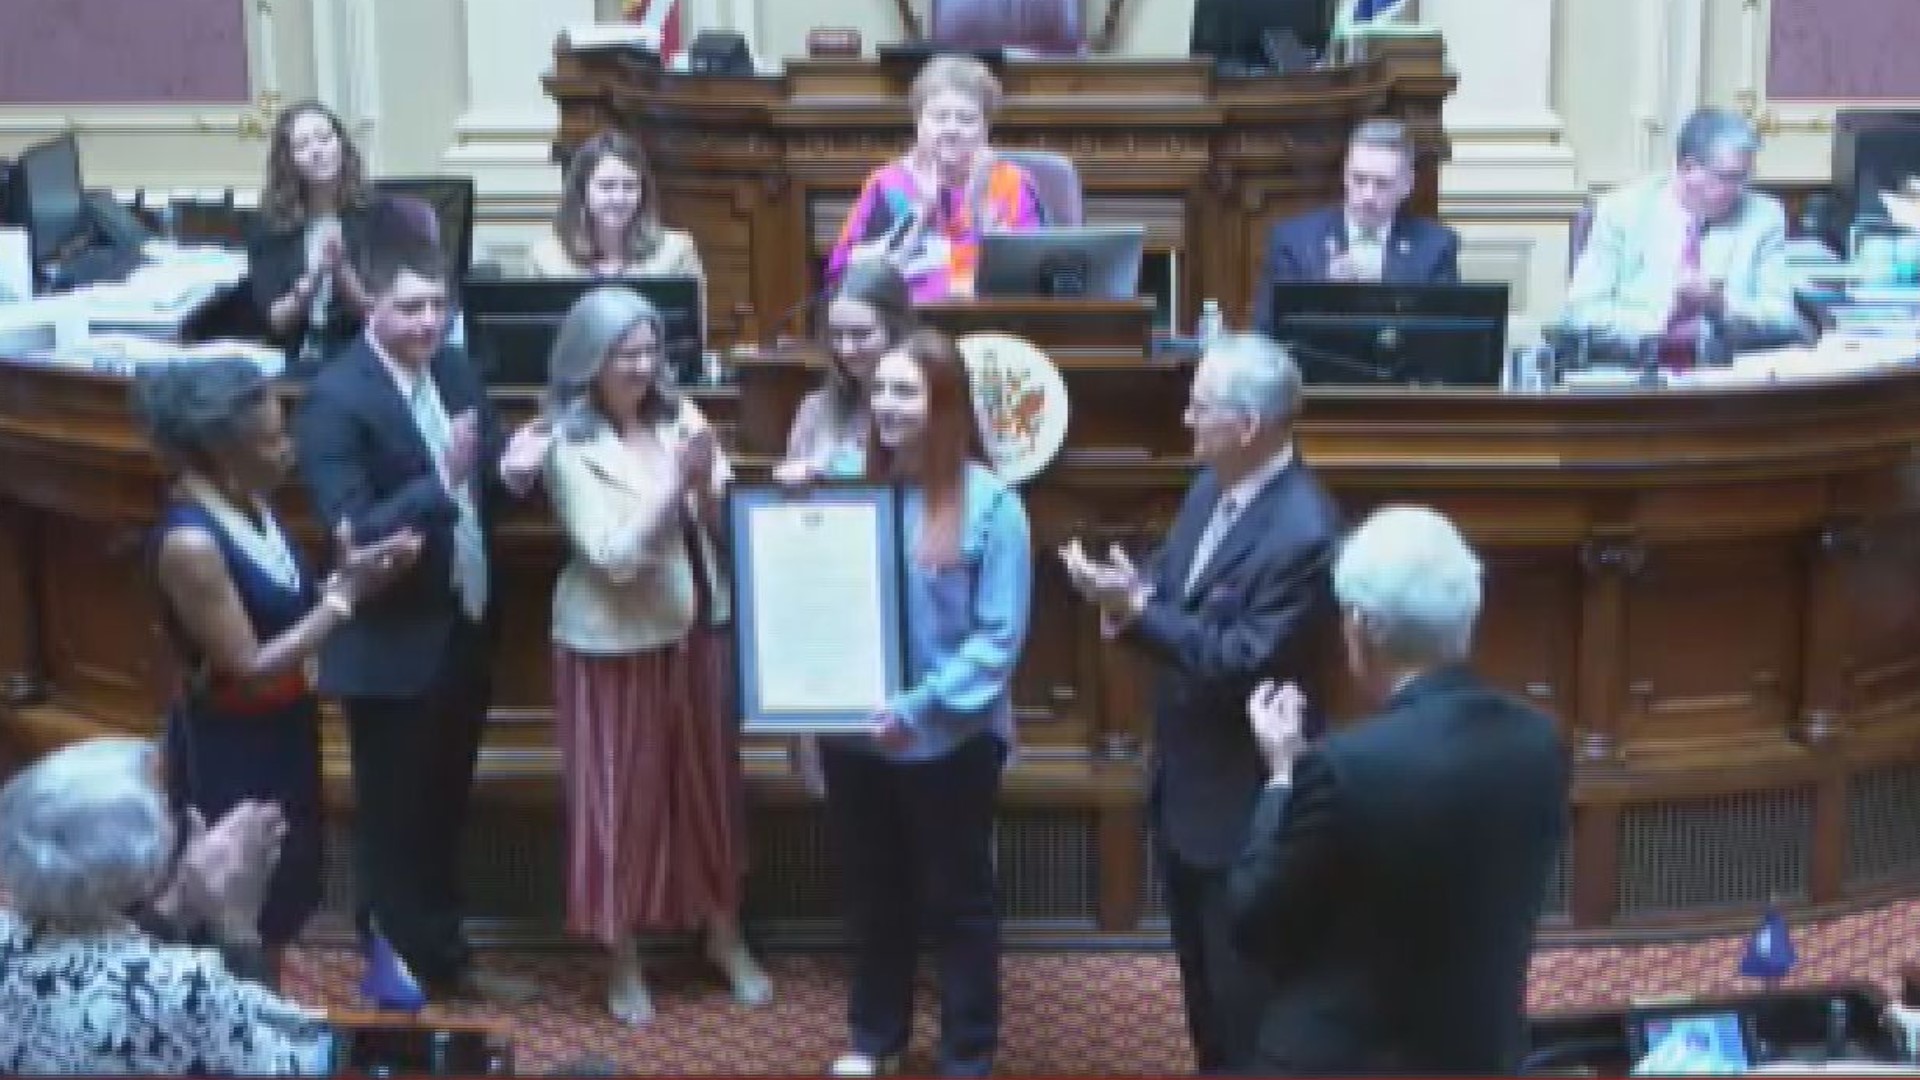 Abby Zwerner was given a framed resolution commending her for her devotion to the safety of her students.